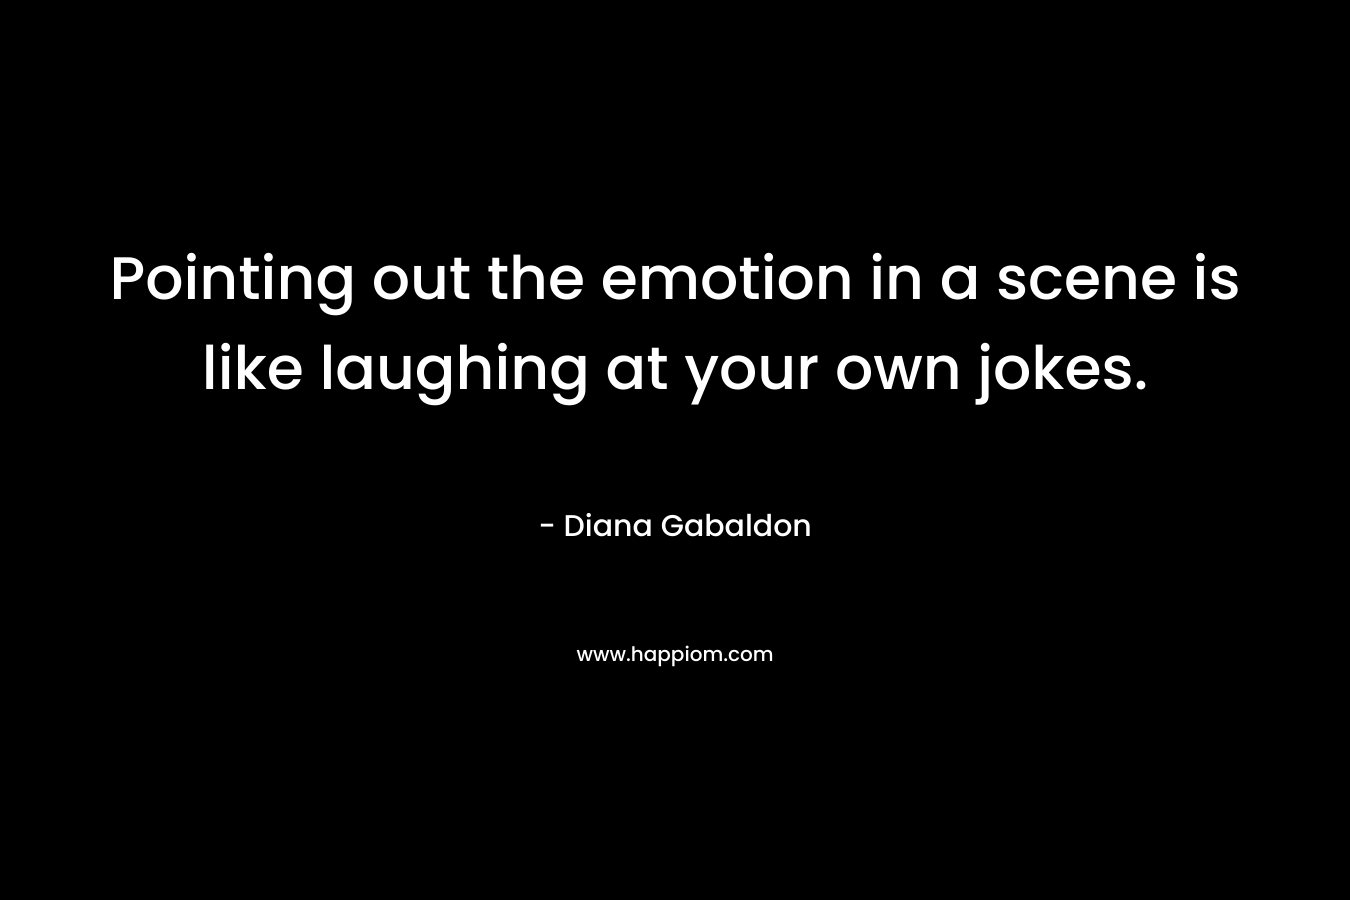 Pointing out the emotion in a scene is like laughing at your own jokes. – Diana Gabaldon